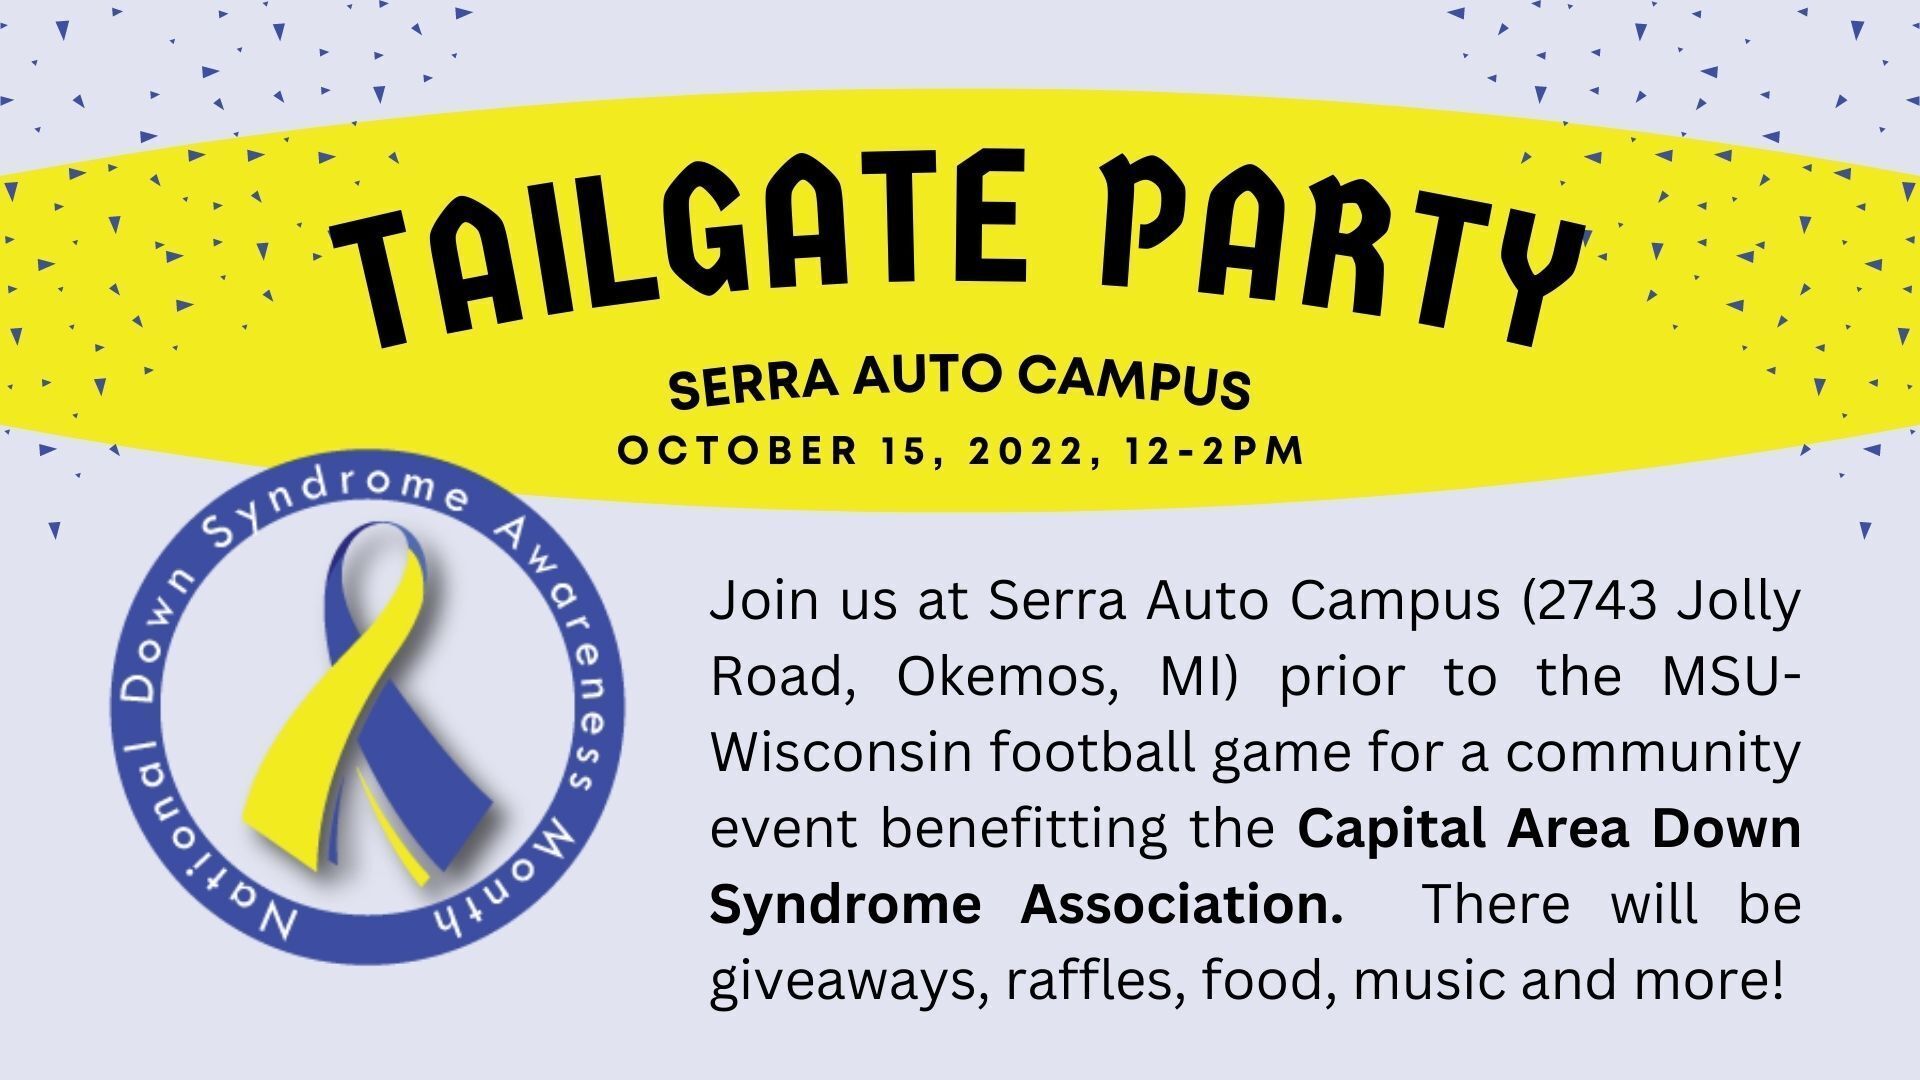 Reads - Tailgate Party, Serra Auto Campus, October 15, 2022, 12-2pm. Join us at Serra Auto Campus prior to the MSU-Wisconsin football game for a community event benefitting the Capital Area Down Syndrome Association. There will be giveaways, raffles, food